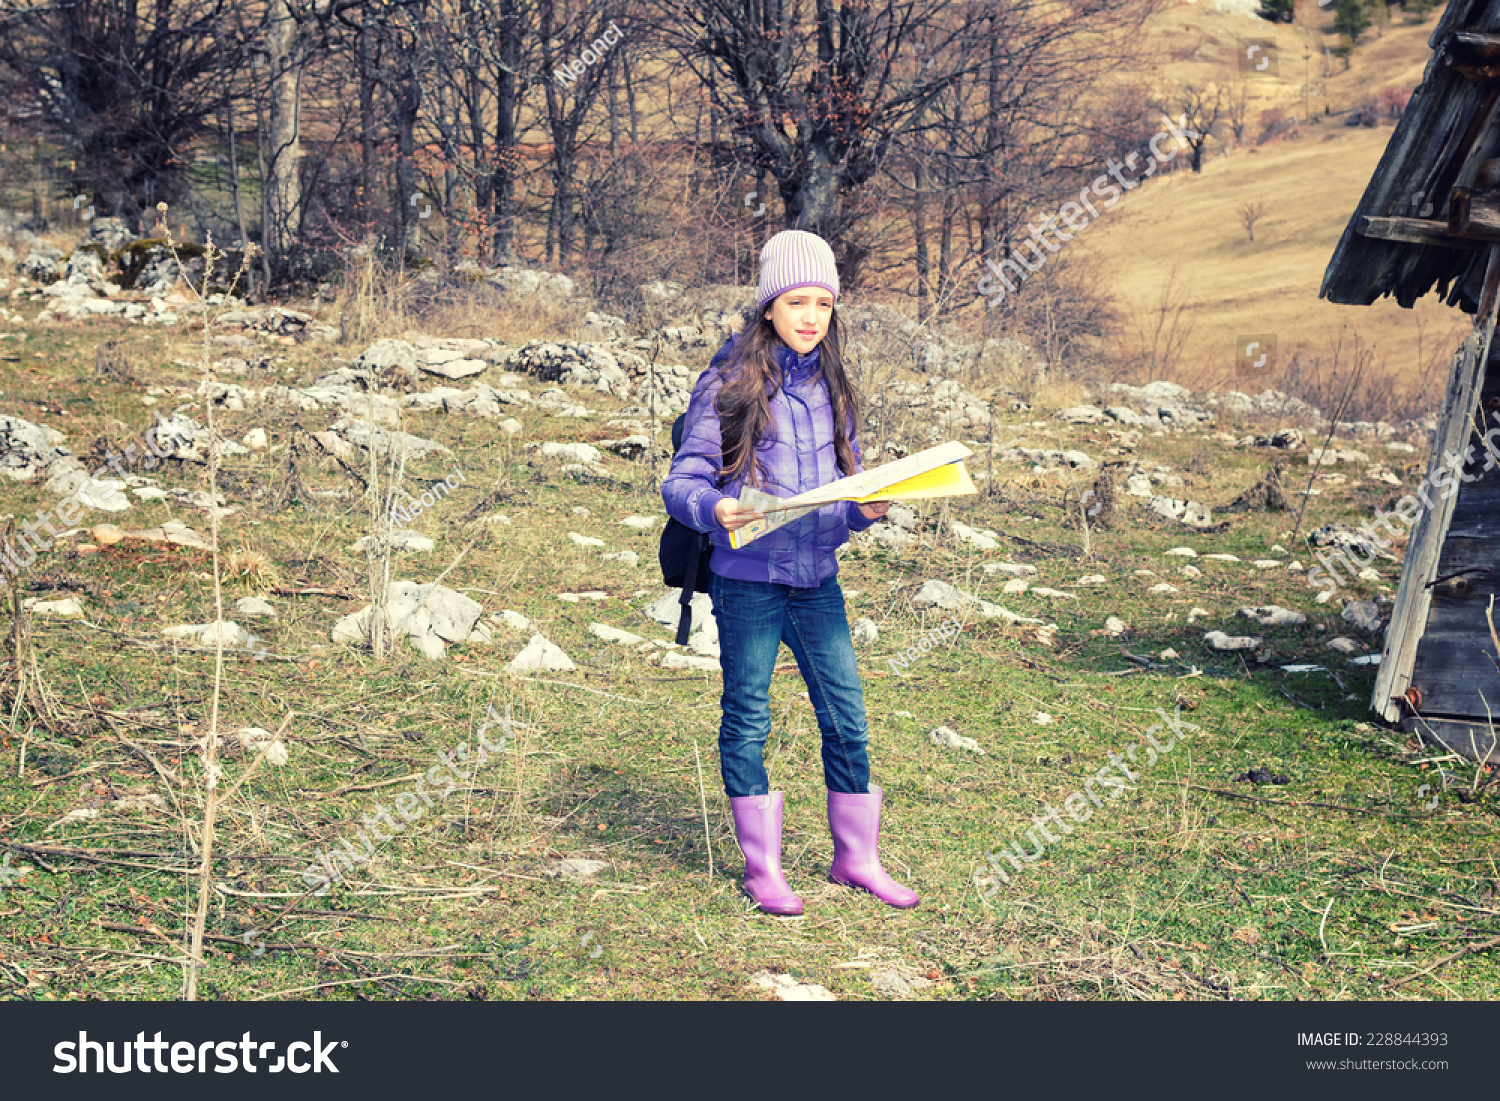 Young girl in countryside looking for directions on the map.Cross processed. #228844393